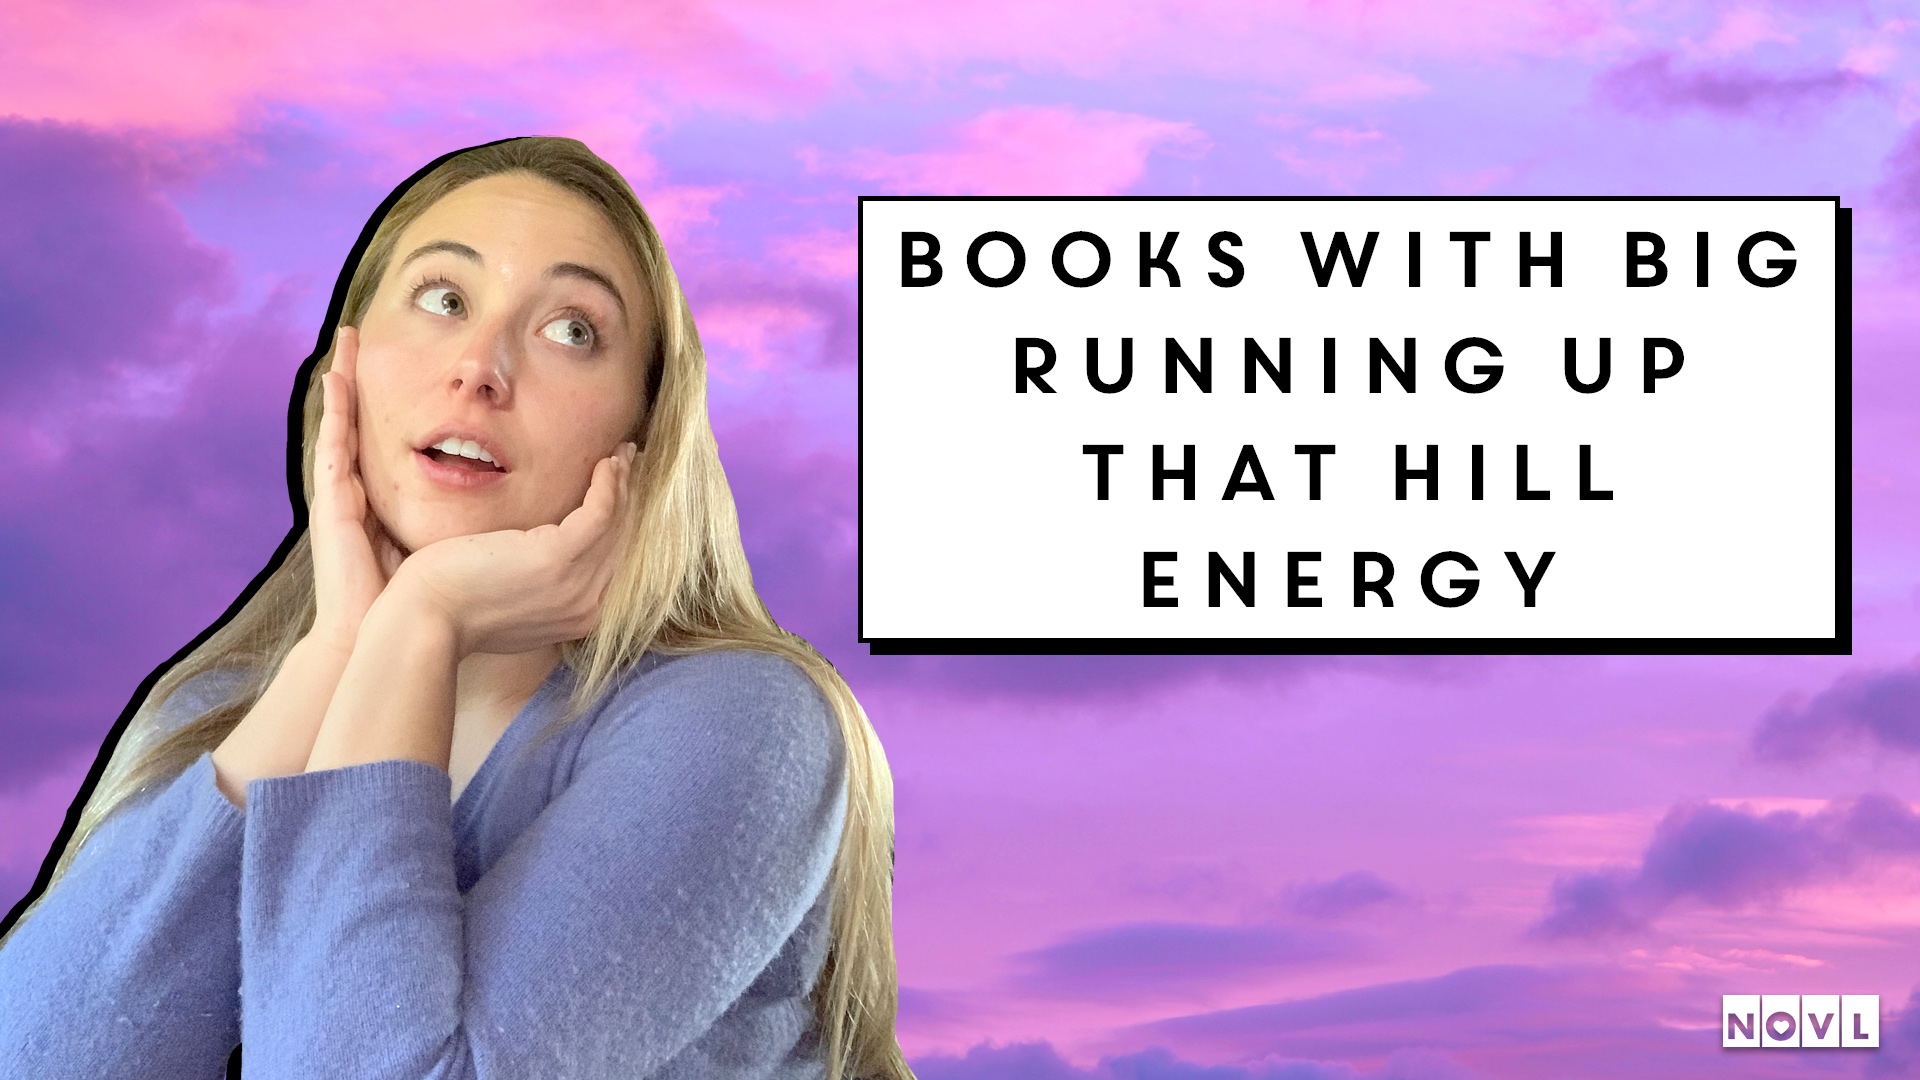 The NOVL Blog, Featured Image for Article: Books with Big Running Up That Hill Energy